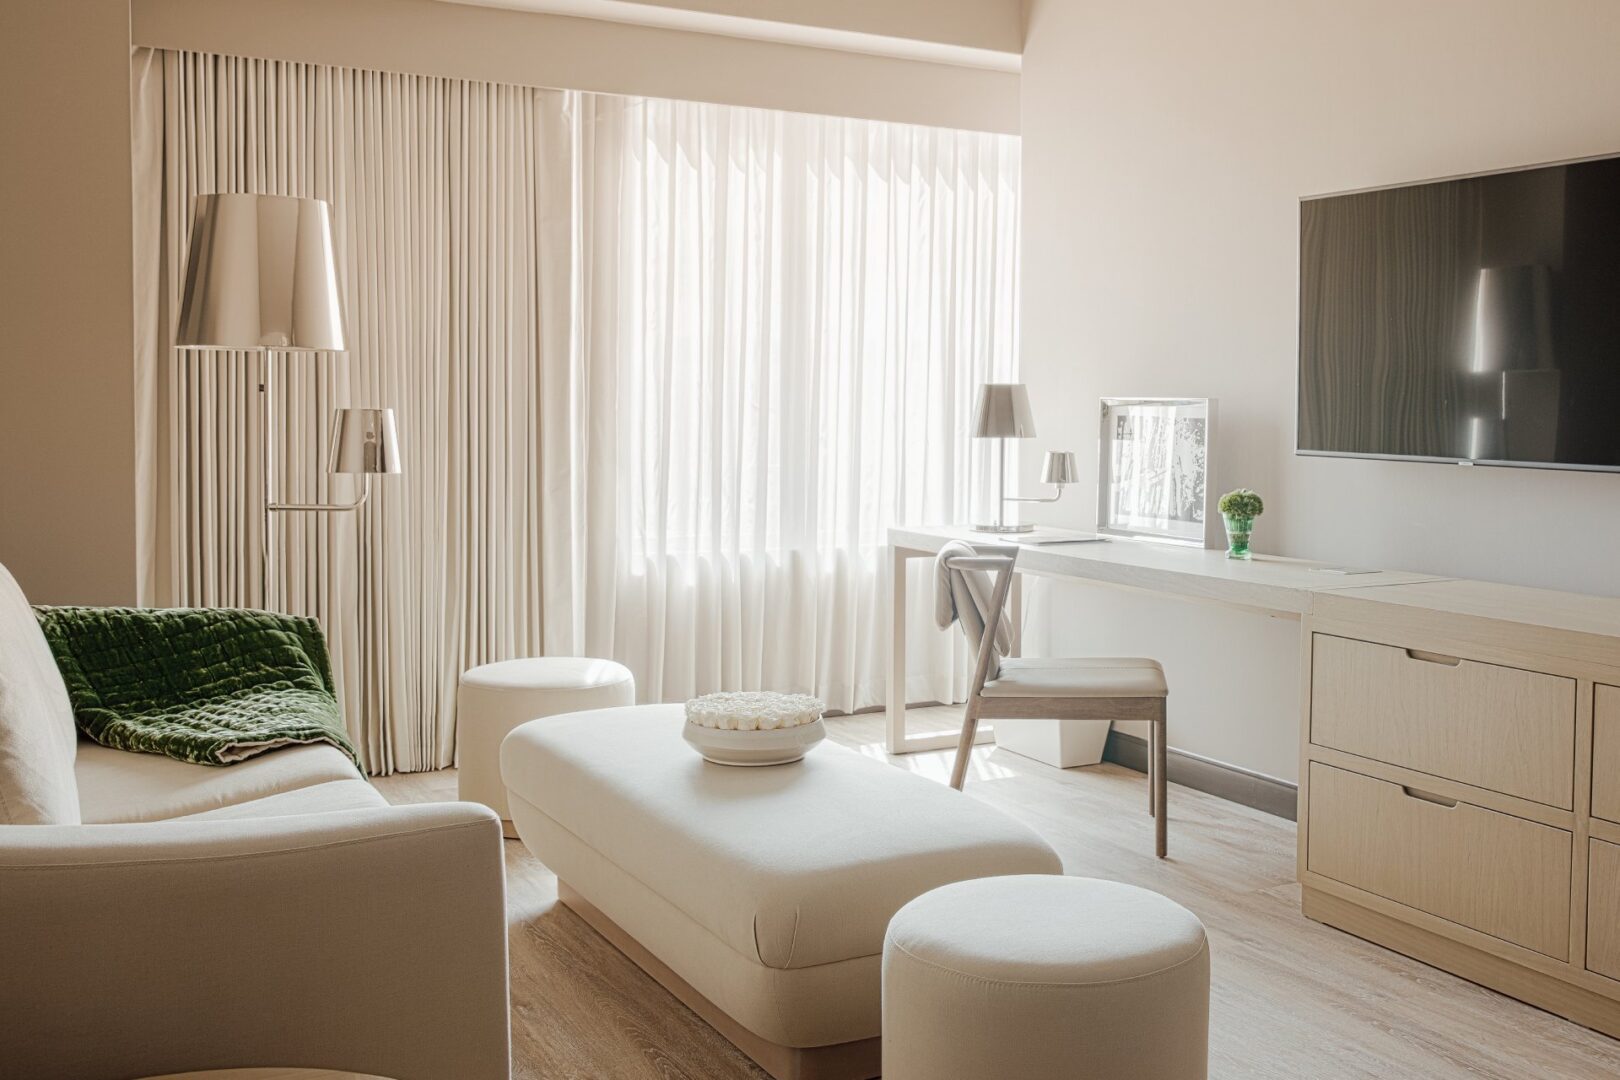 A living room with white furniture and curtains.